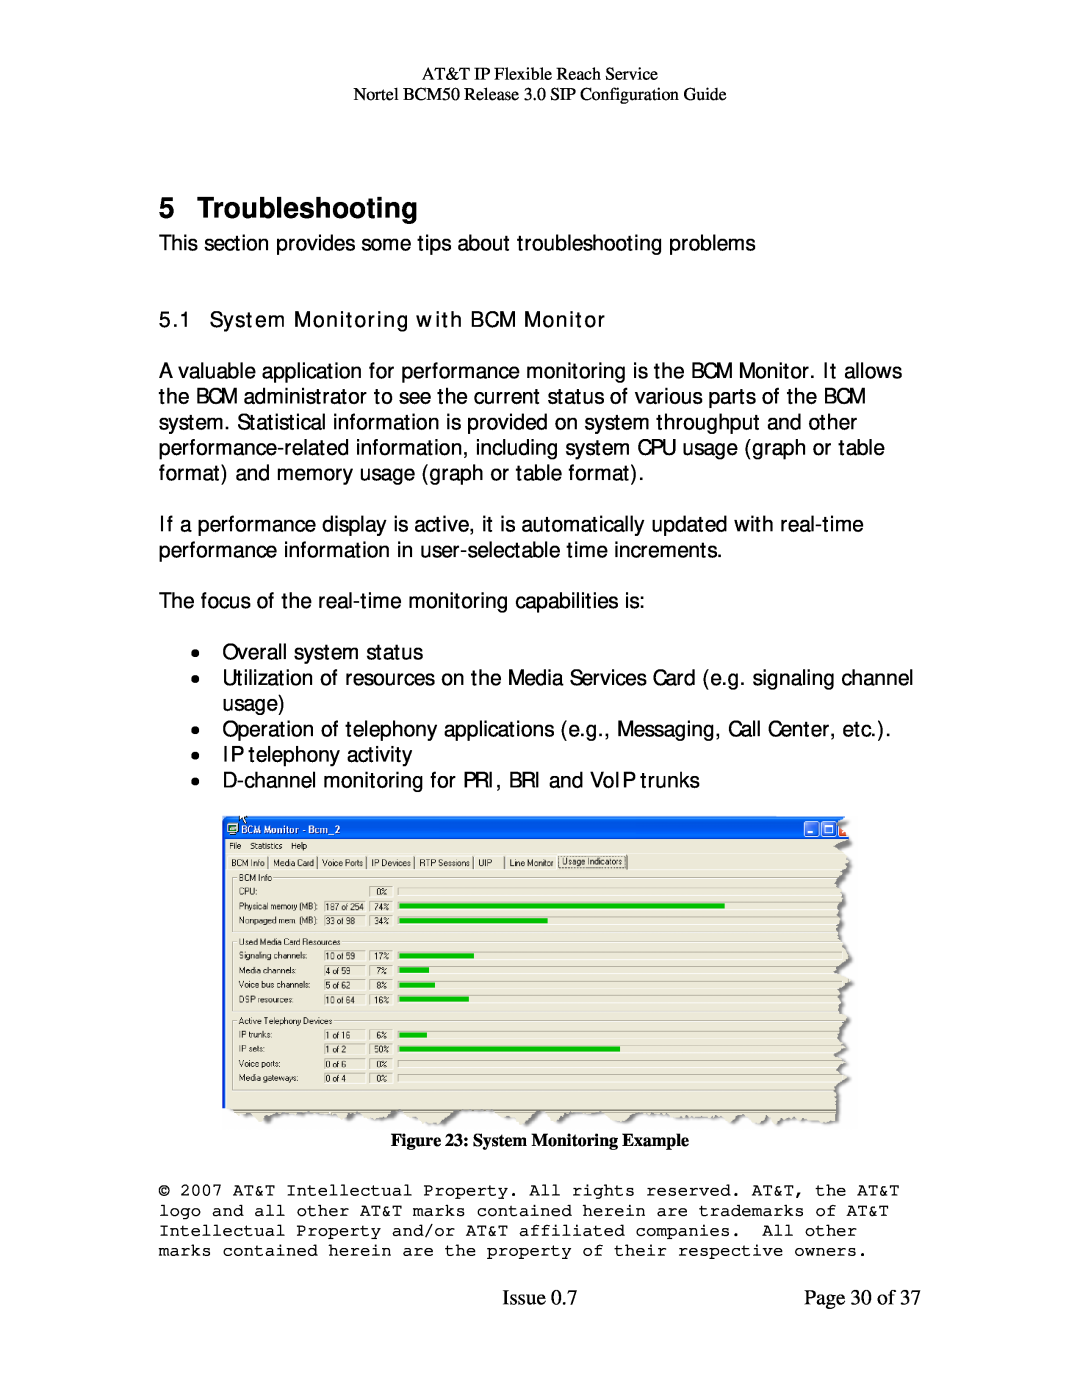 AT&T BCM50 manual Troubleshooting, System Monitoring with BCM Monitor 